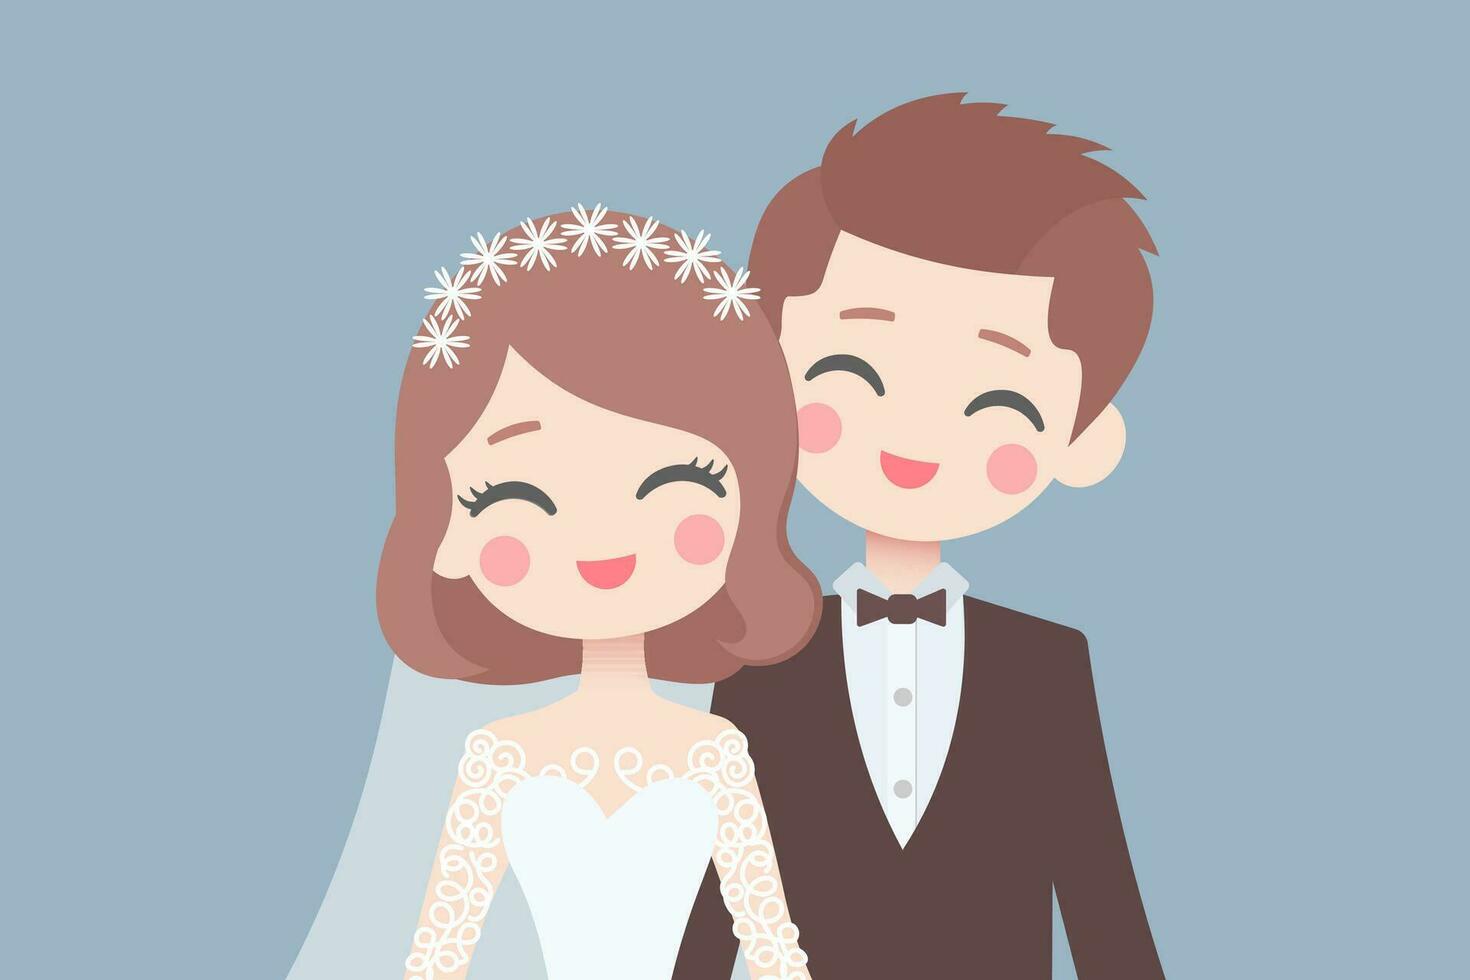 Wedding marriage ceremony, happy cute Bride and groom at wedding, Young love couple getting married, valentine day and matrimony invitation card concept, love vector illustration.